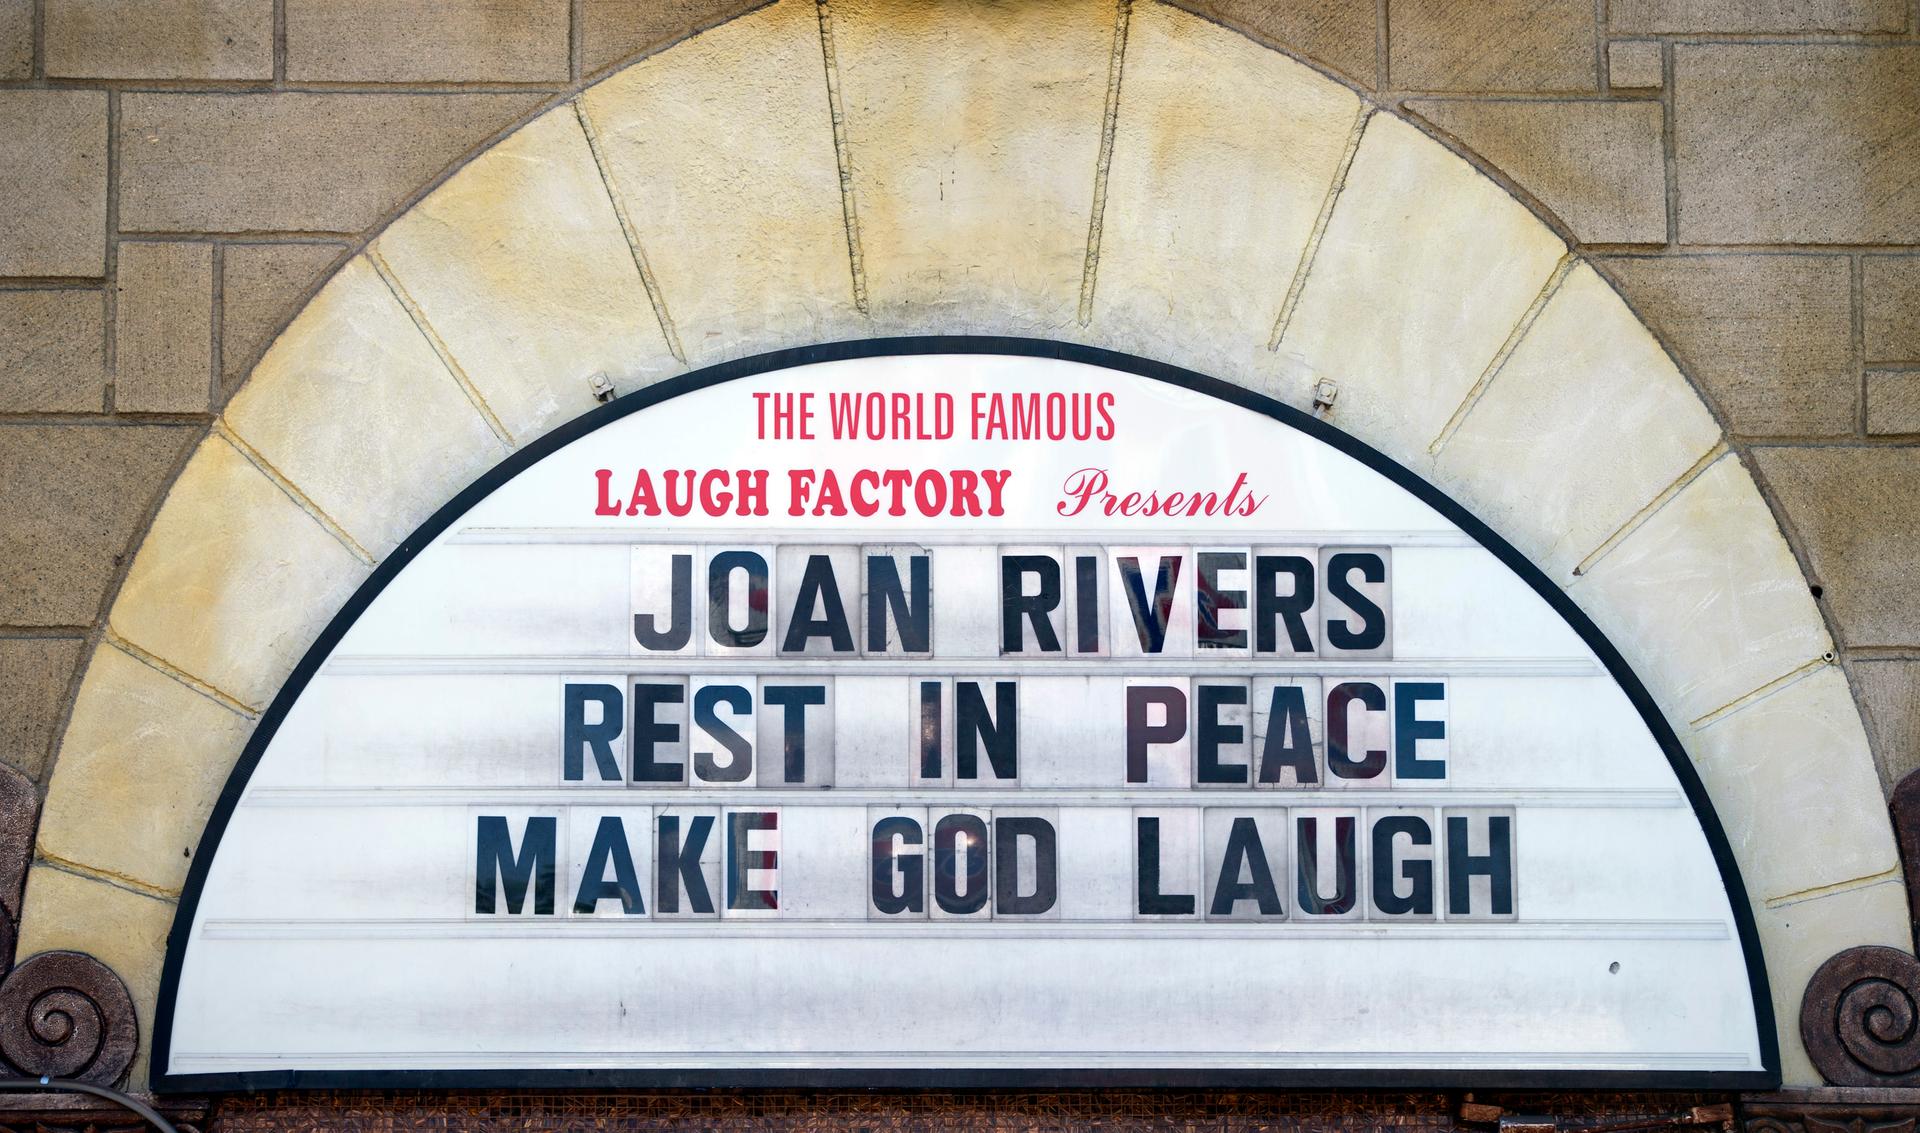 A marquee put up in honor of comedian Joan Rivers at The Laugh Factory comedy club in Los Angeles, California. Rivers, the pioneering comedian known for her acerbic wit, classic put-downs and for asking "Can we talk?," died on Thursday at the age of 81.